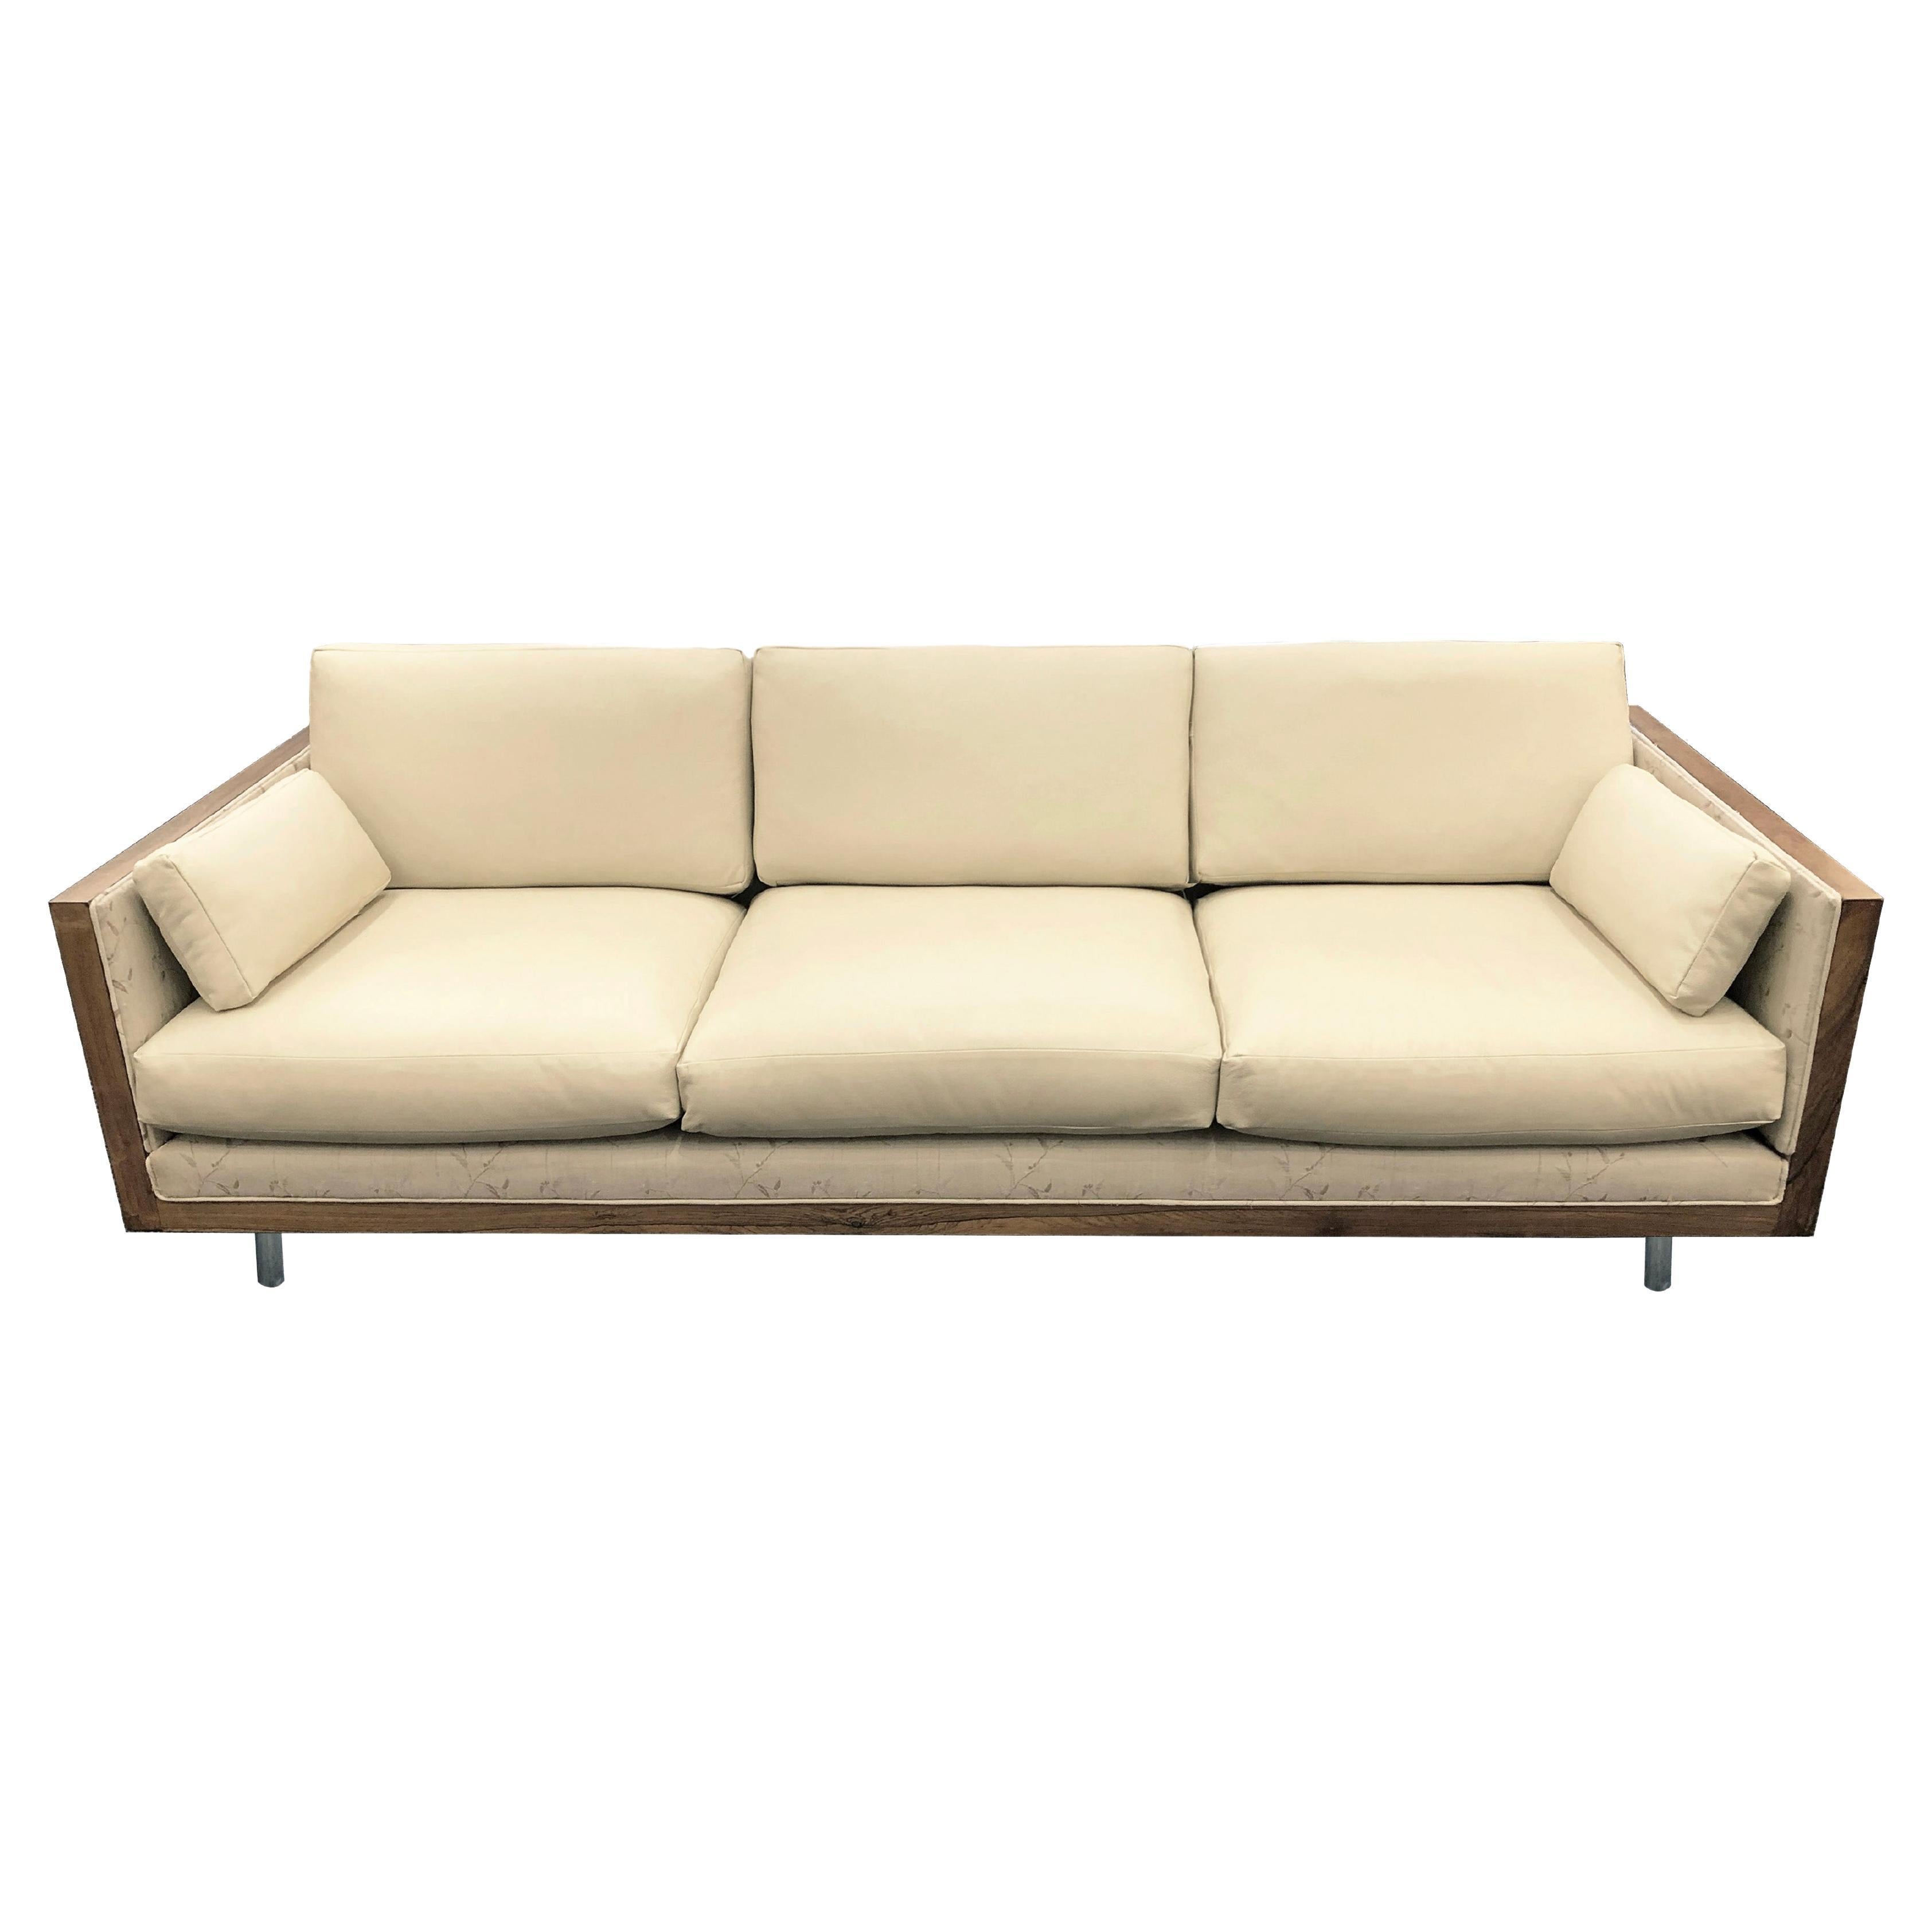 A sofa in the manner of Milo Baughman for Thayer Coggin in warm beige leather wrapped in beautifully figured rosewood, manufactured by Charlton for its 